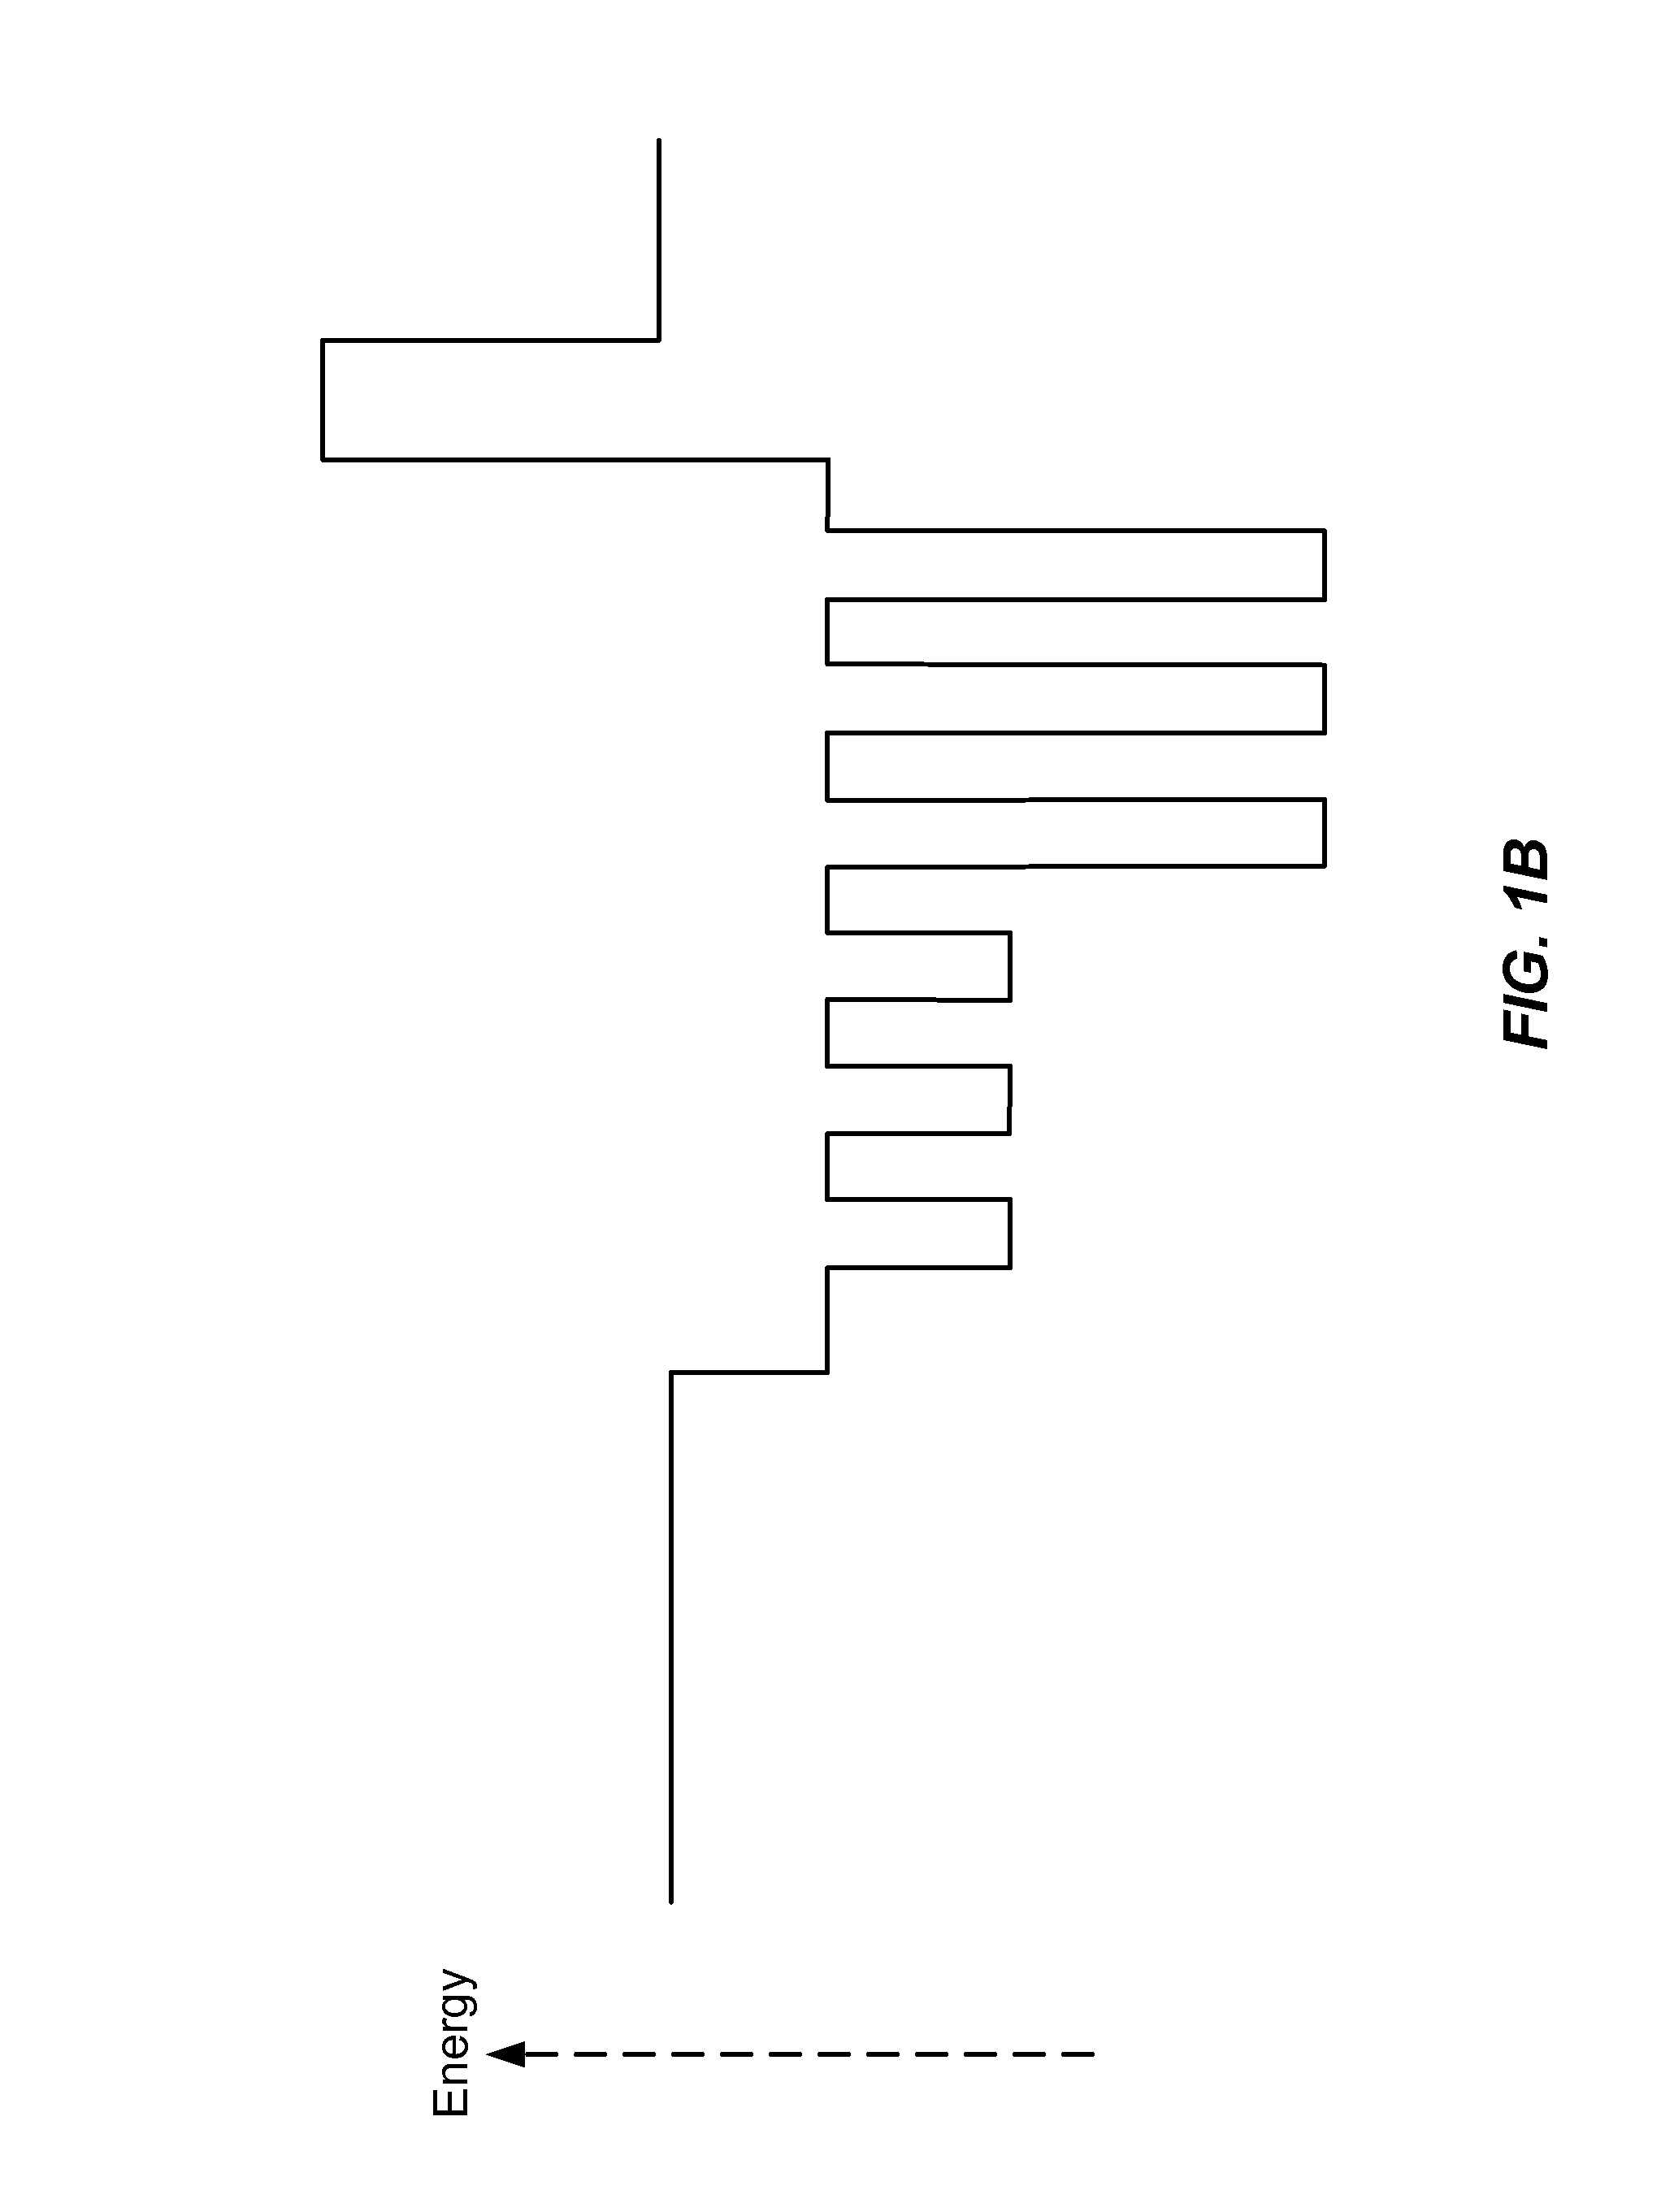 Multi color active regions for white light emitting diode